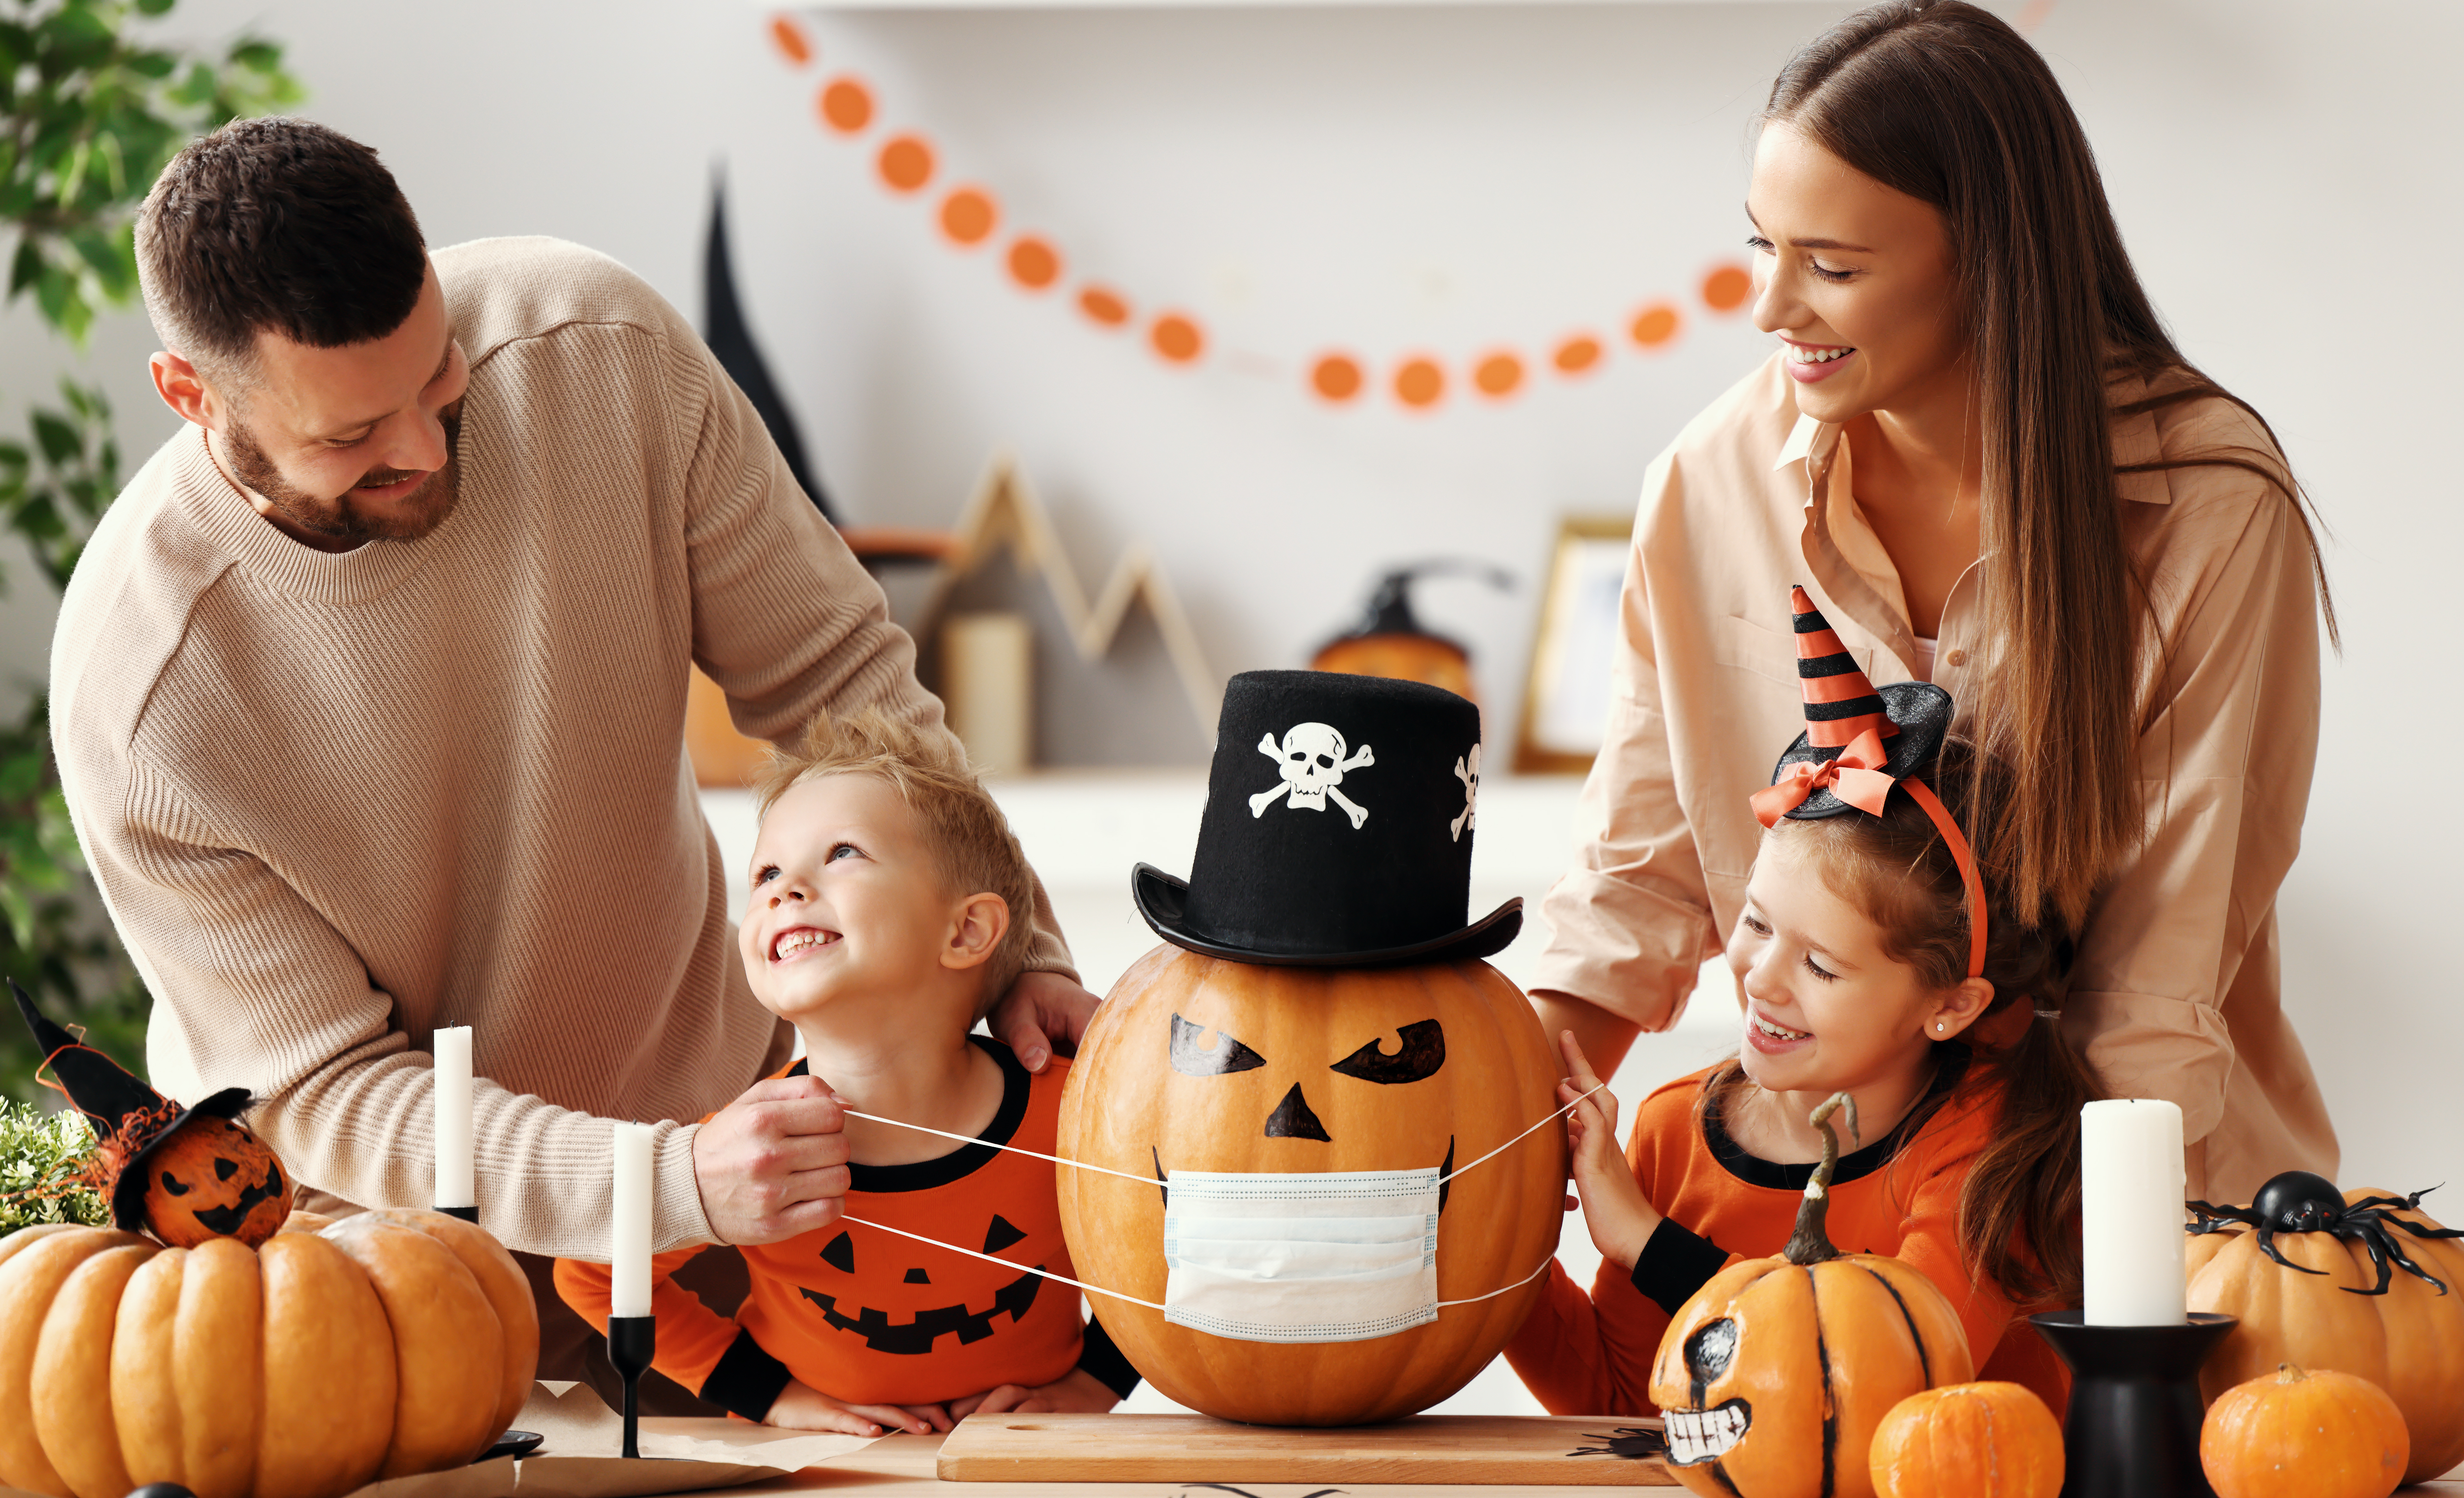 Halloween Safety During COVID-19 - Premier Pediatric Urgent Care Provider in Texas - Little Spurs Pediatric Urgent Care